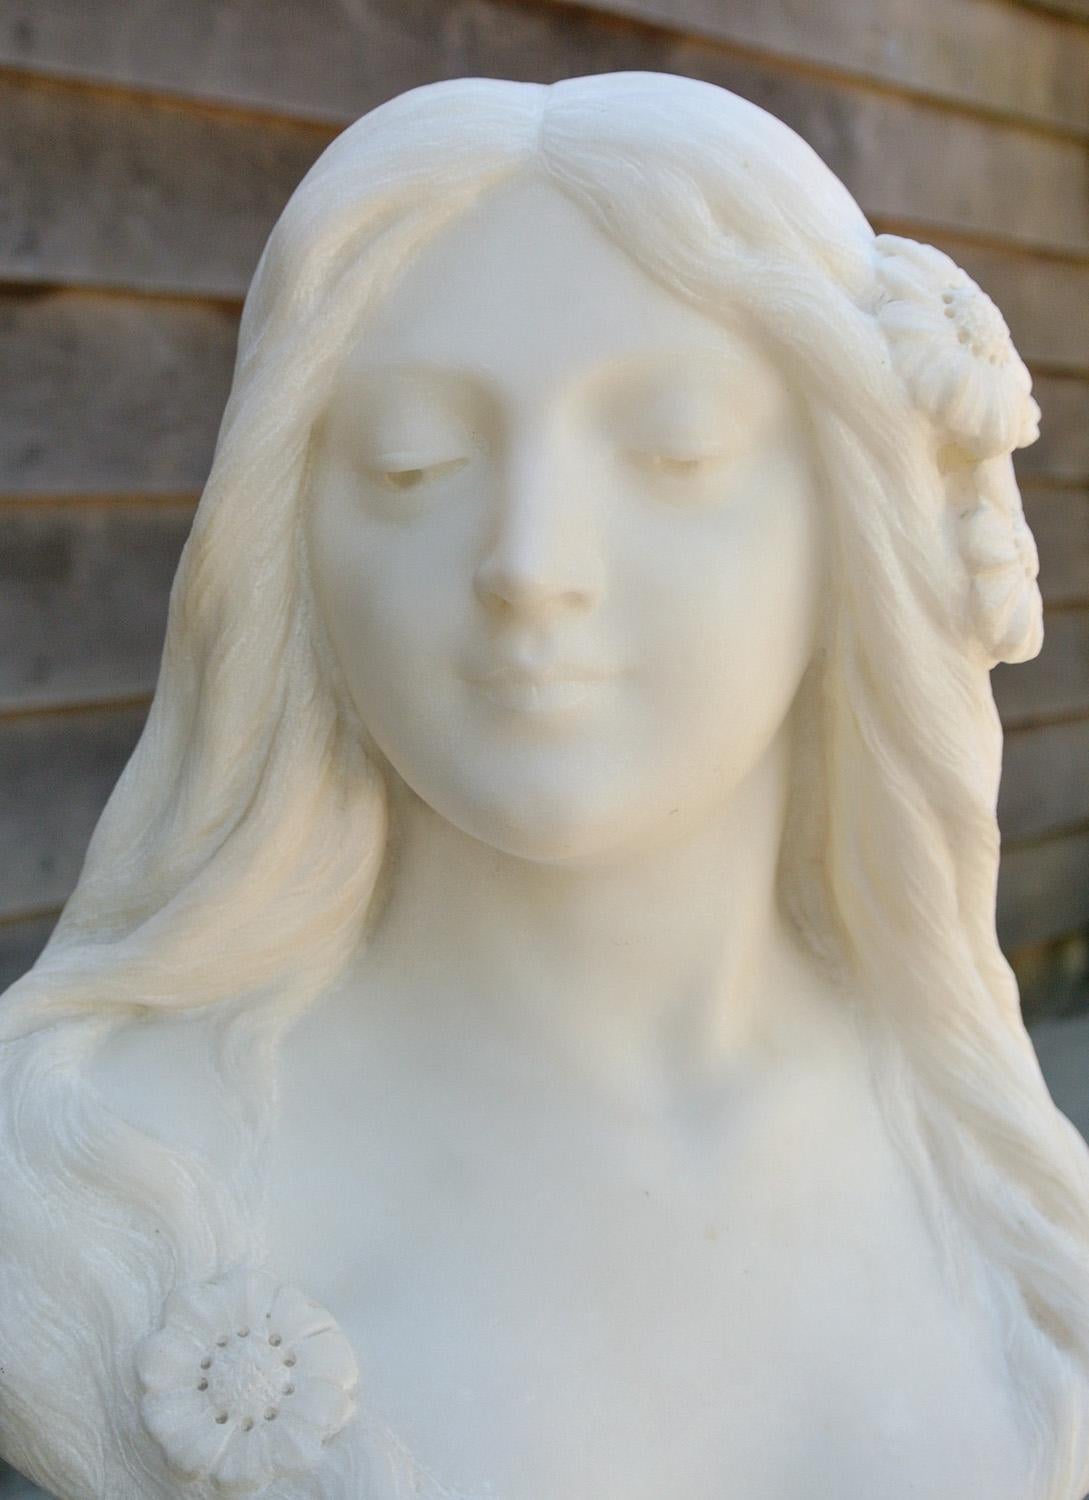 Follower of Emilio Fiaschi (1858 - 1940) a finely carved large alabaster bust of a beautiful young woman with flowing hair woven with daisies.

Art Nouveau period circa 1890, this graceful, beautiful and enigmatic young woman has been modelled in